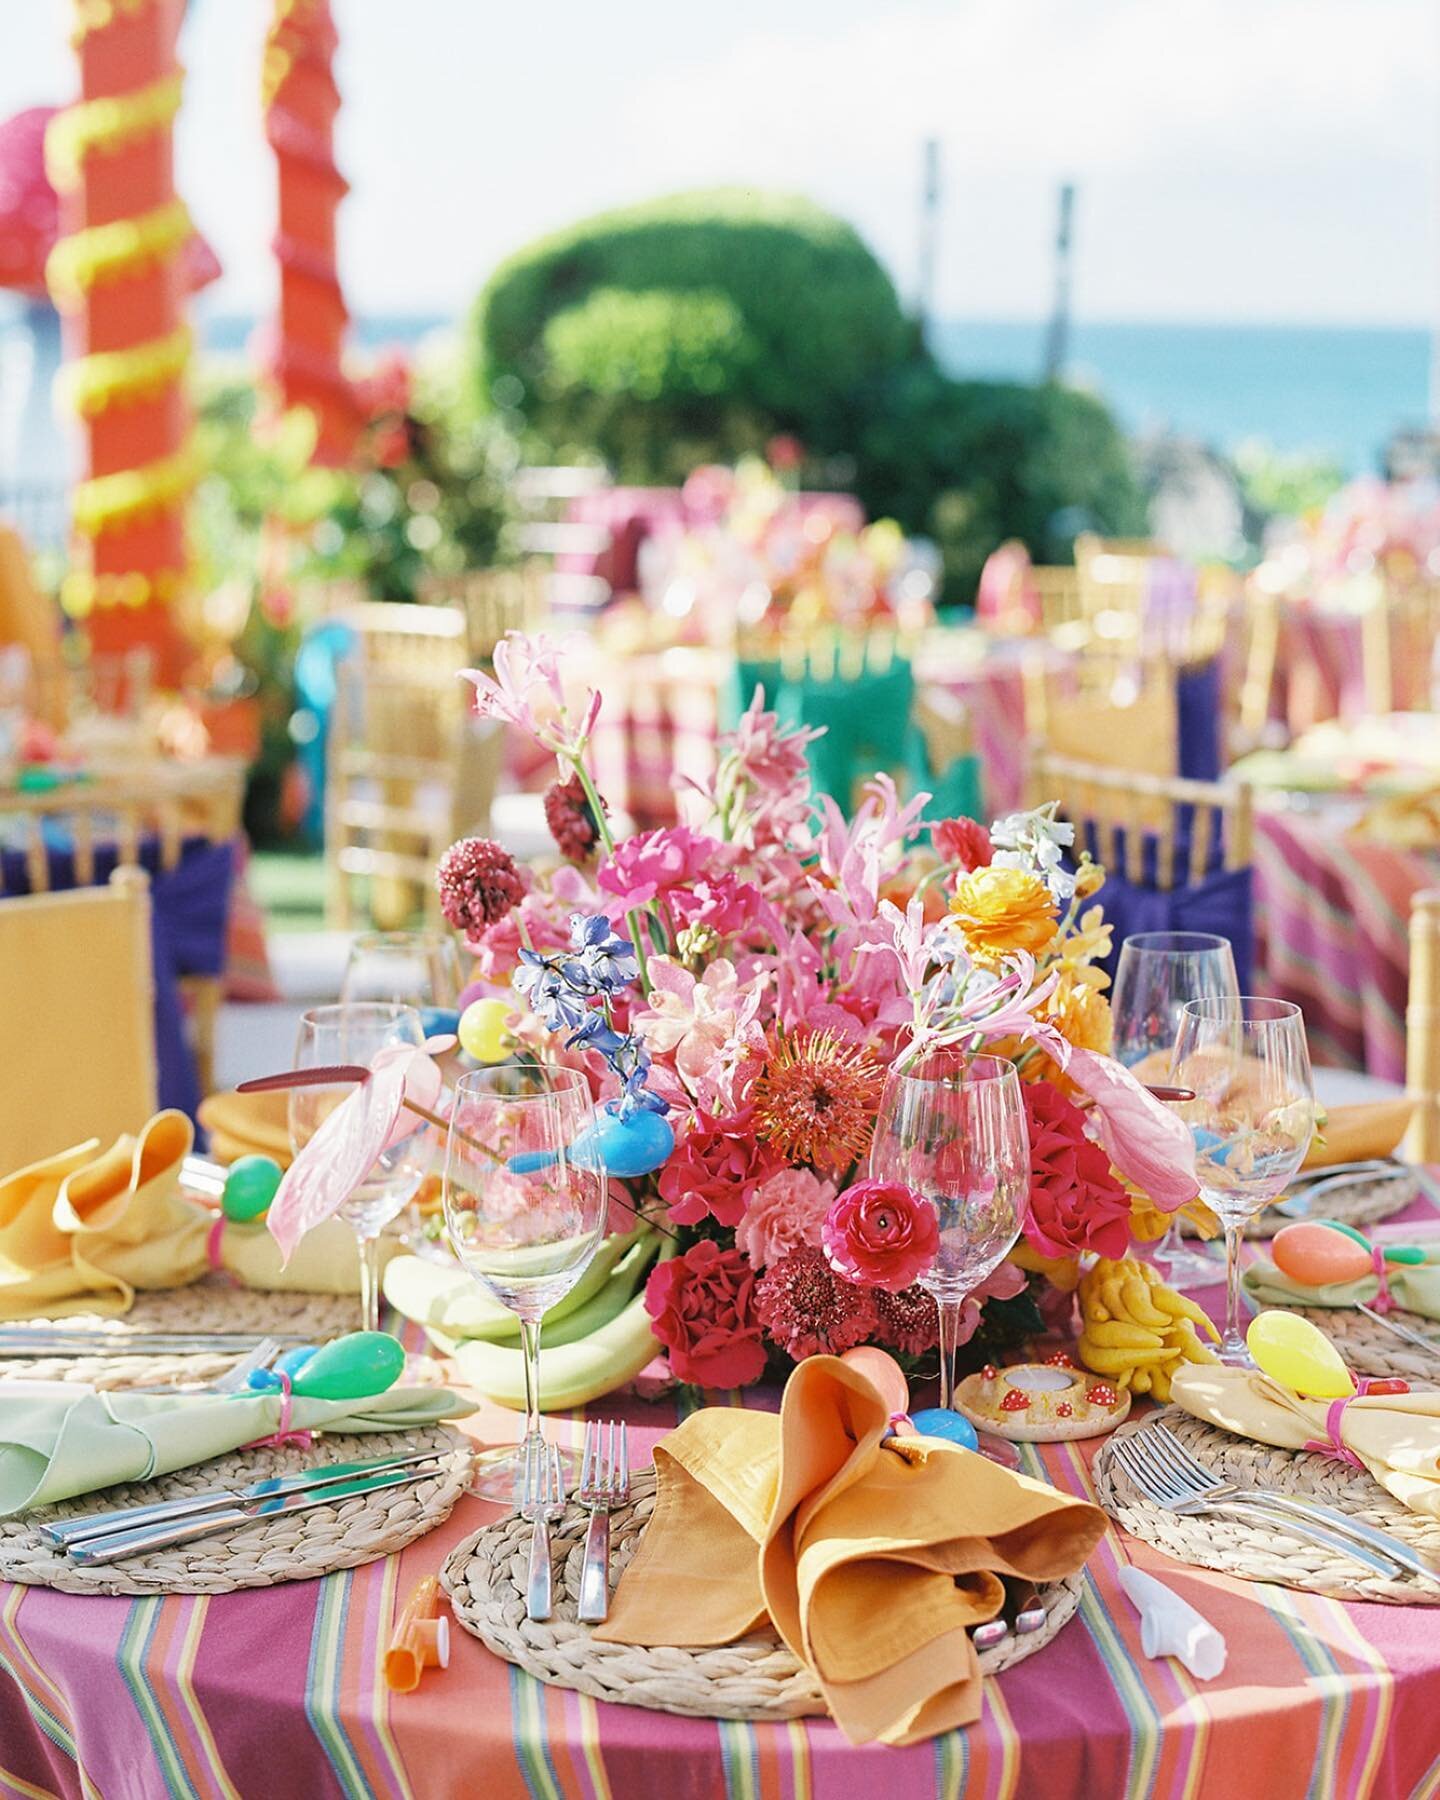 Design deck reads Dr. Suess, wild, out of this world fiesta, Burning Man meets Disney Light Up Parade 💥 @bestevents @jadeiovine @brejanephoto @accelrentals @artisan.events.maui @fsmaui as seen in @vogueweddings